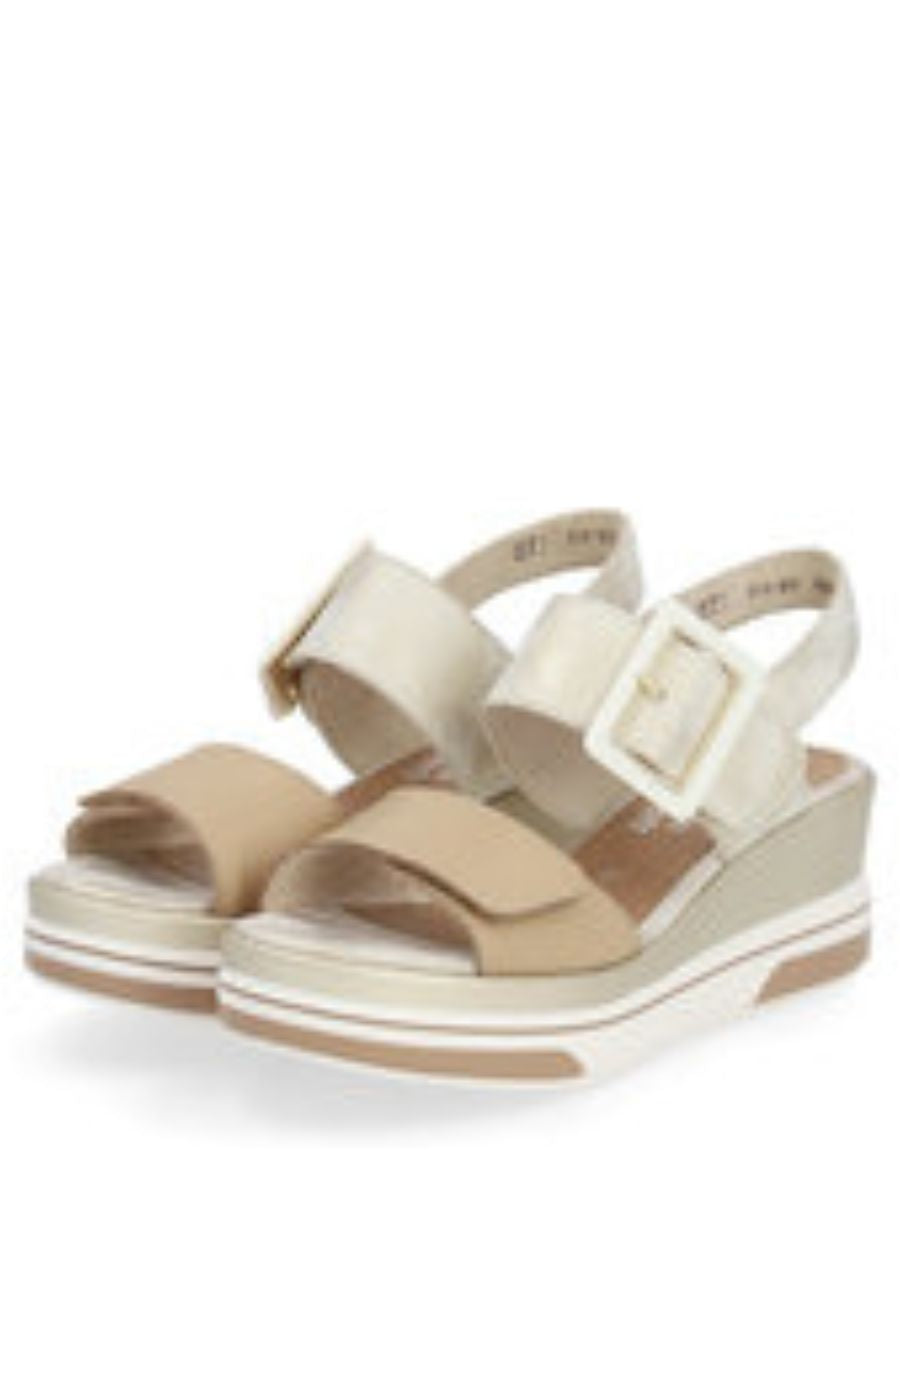 Remonte Wedge Buckle Sandal in Gold